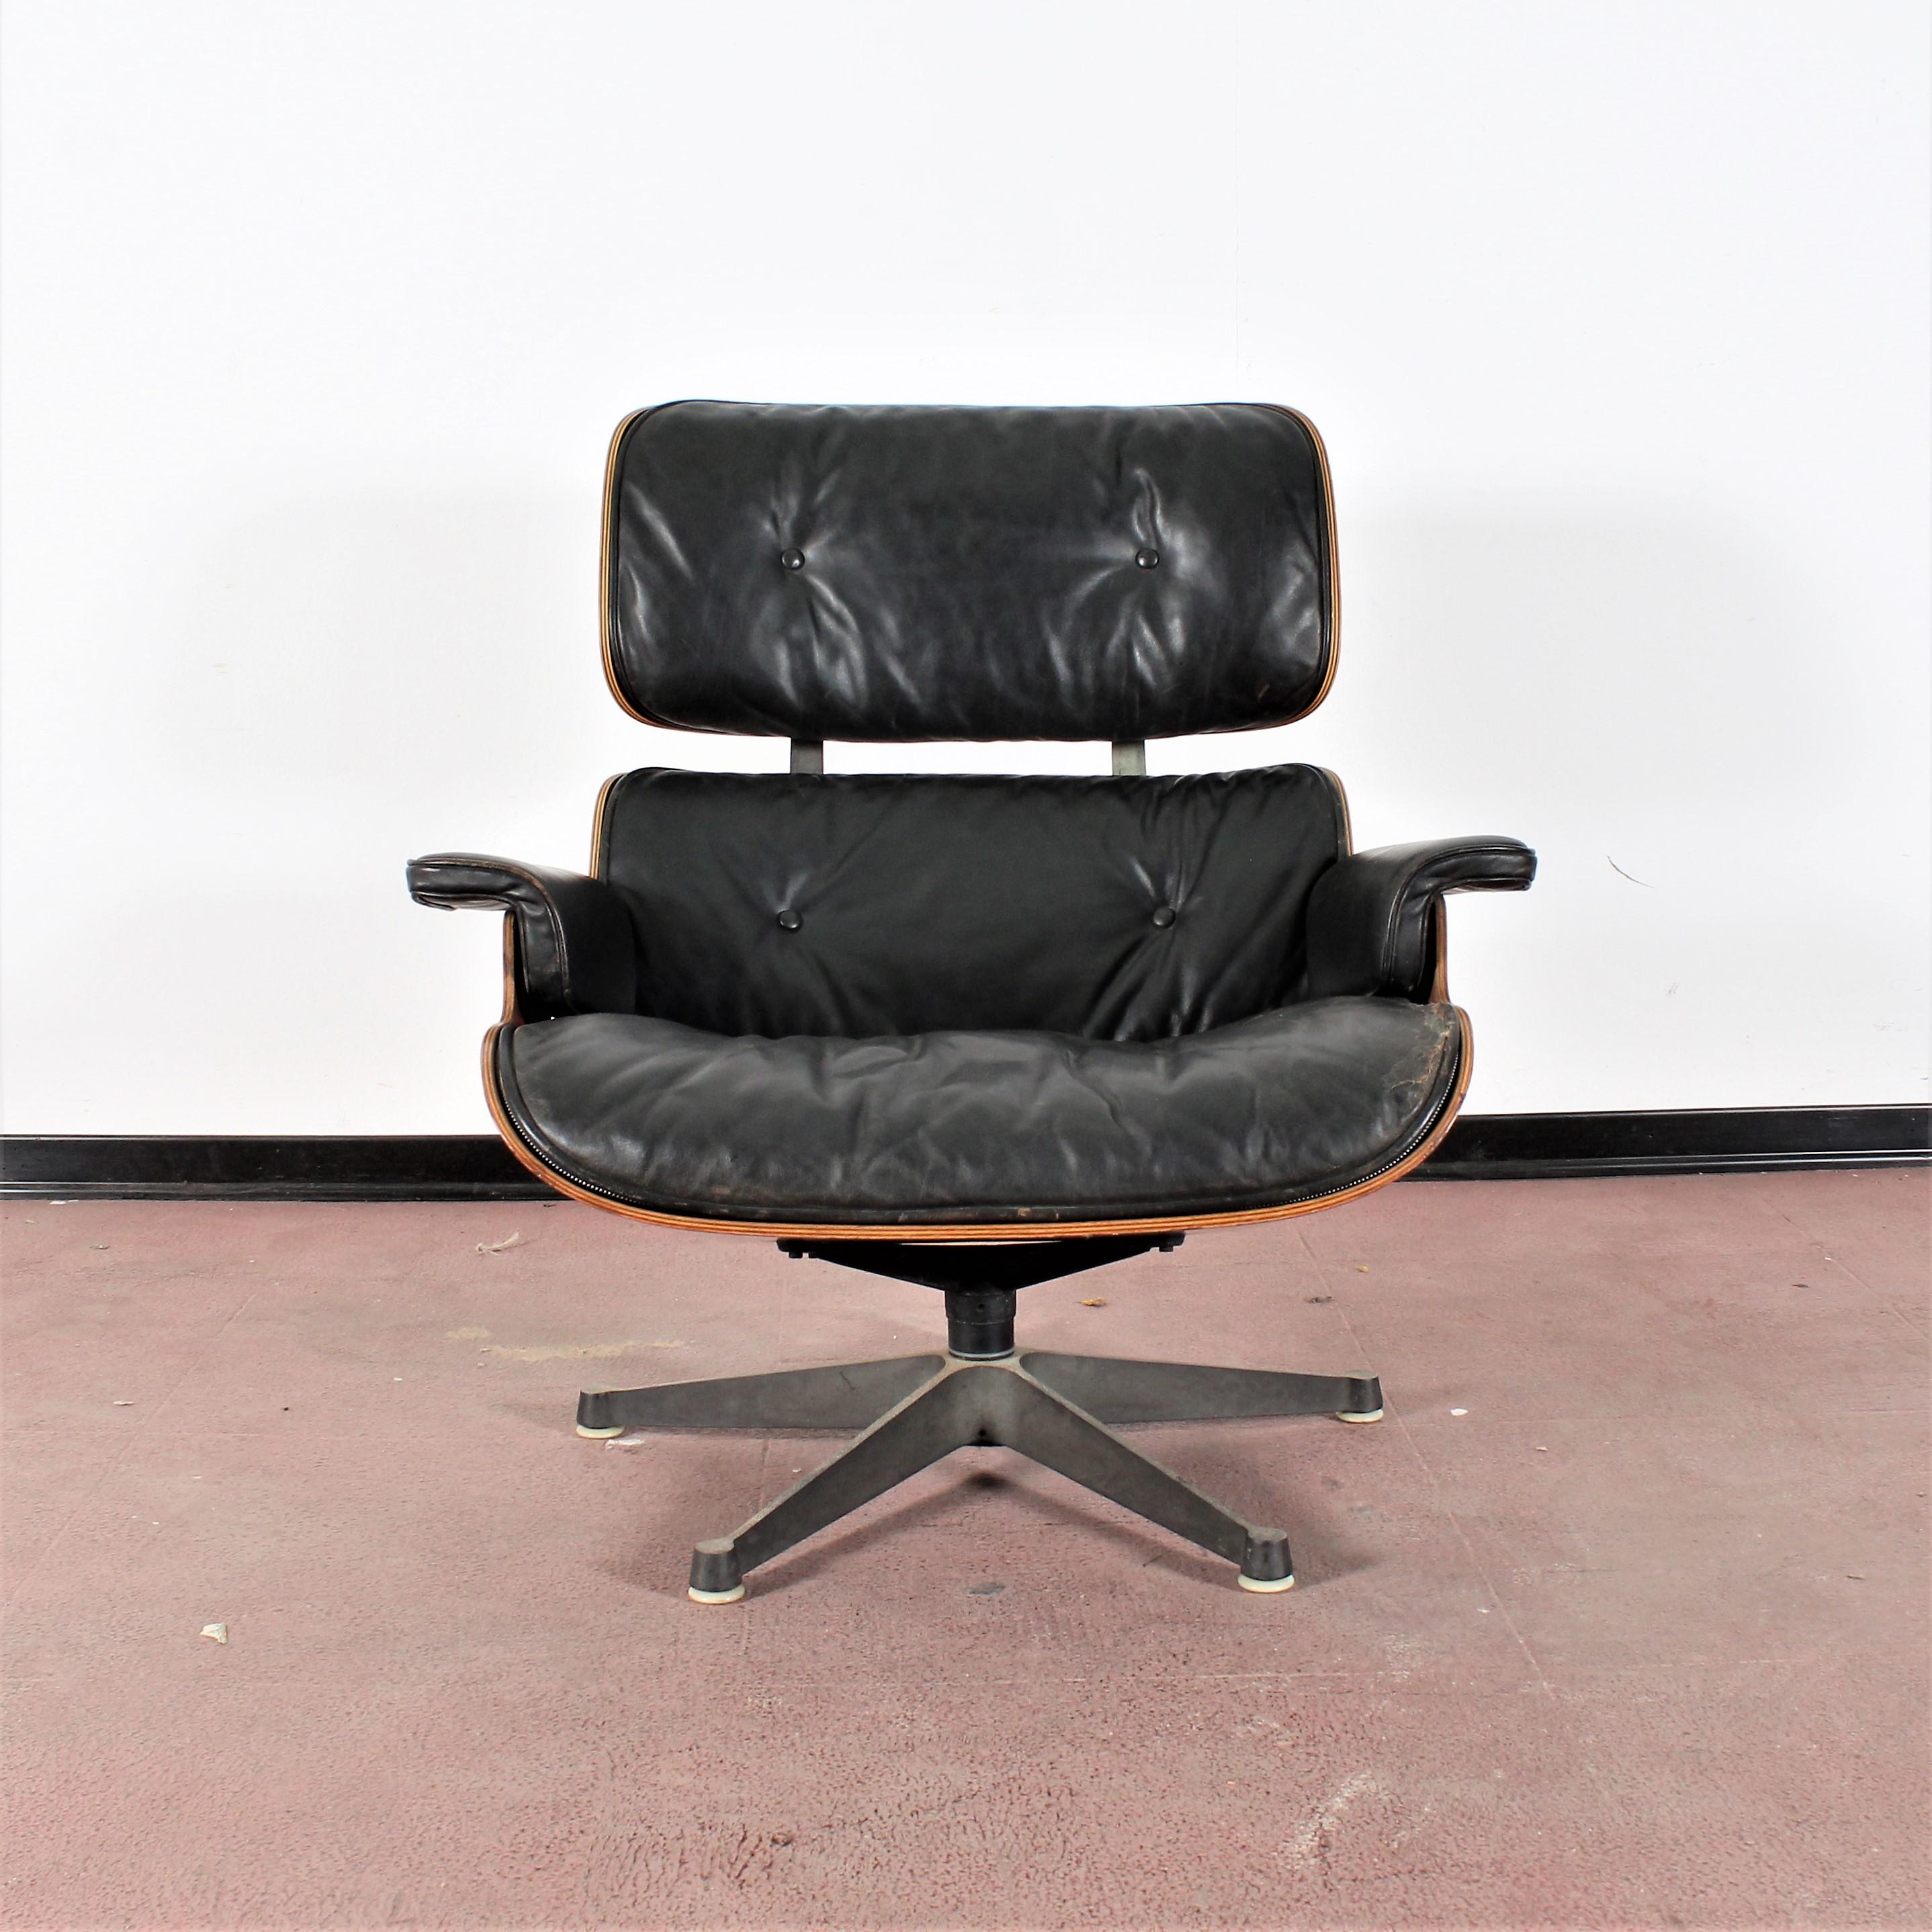 Vintage Eames wood lounge chairs. An iconic pair by Charles and Ray Eames. These are mid-1960s examples. The condition are totally and strictly original.
Frayed leather as in the photo
Wear consistent with age and use.

  